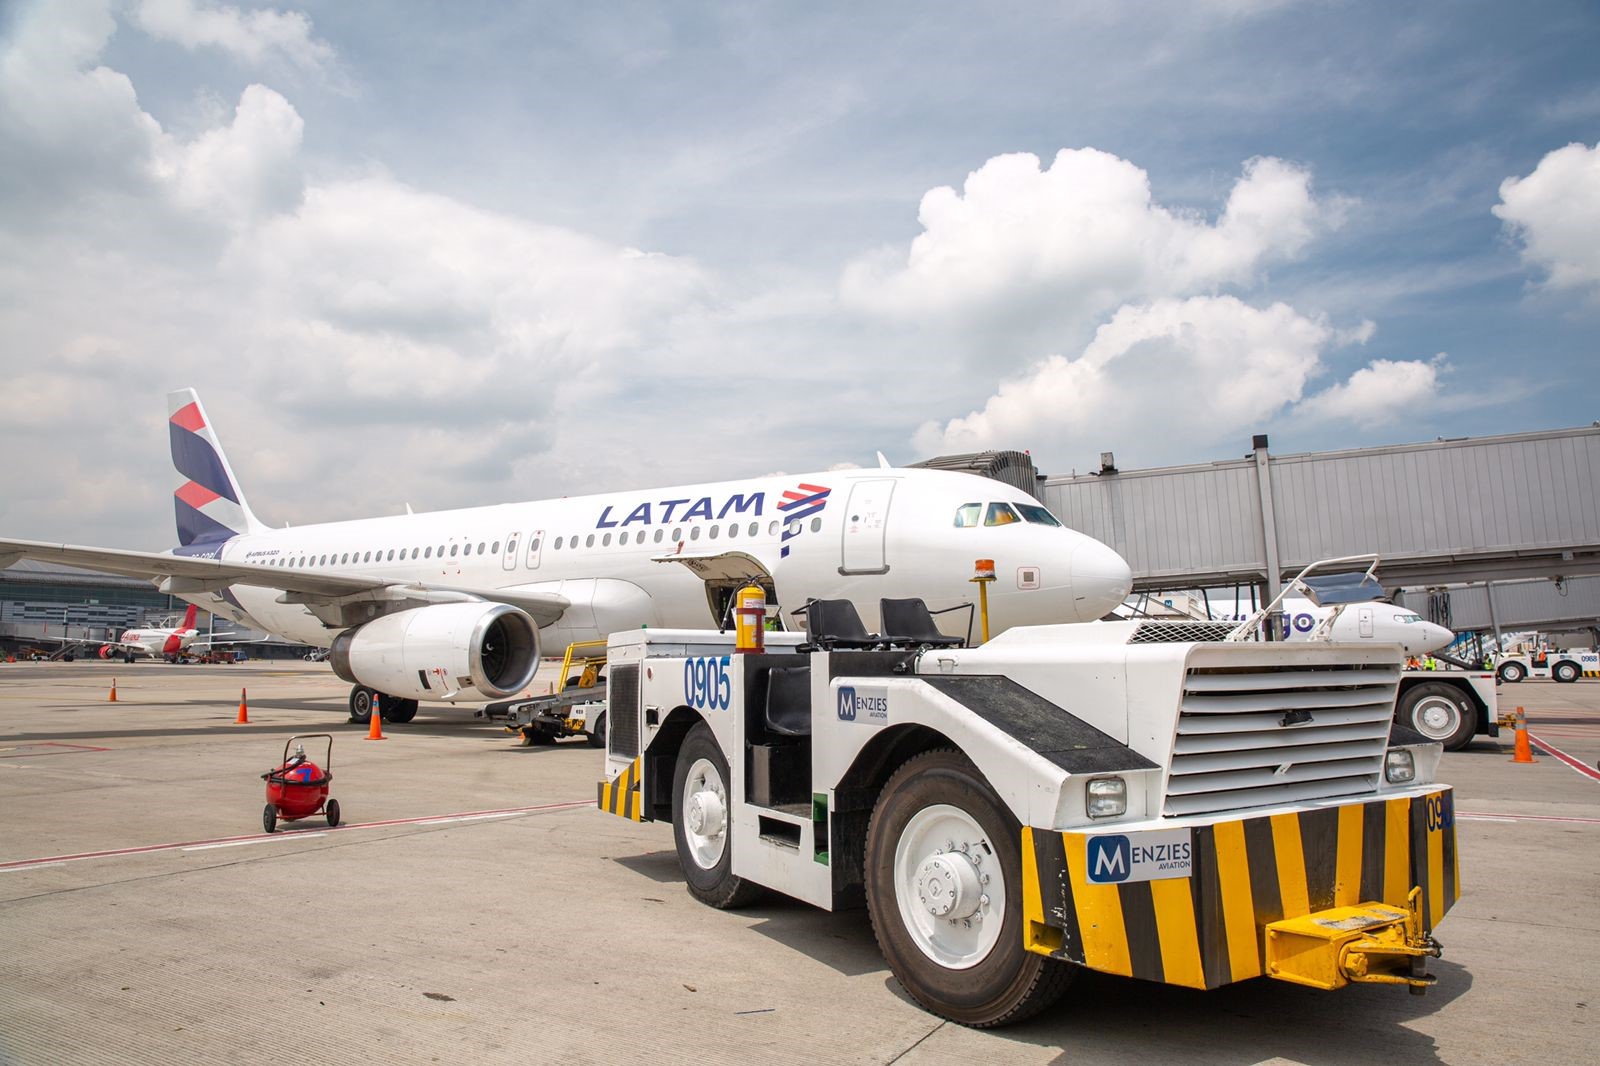 Menzies  Aviation 's  New  Achievement in Australia  -  First engineering contract  with  LATAM Airlines !